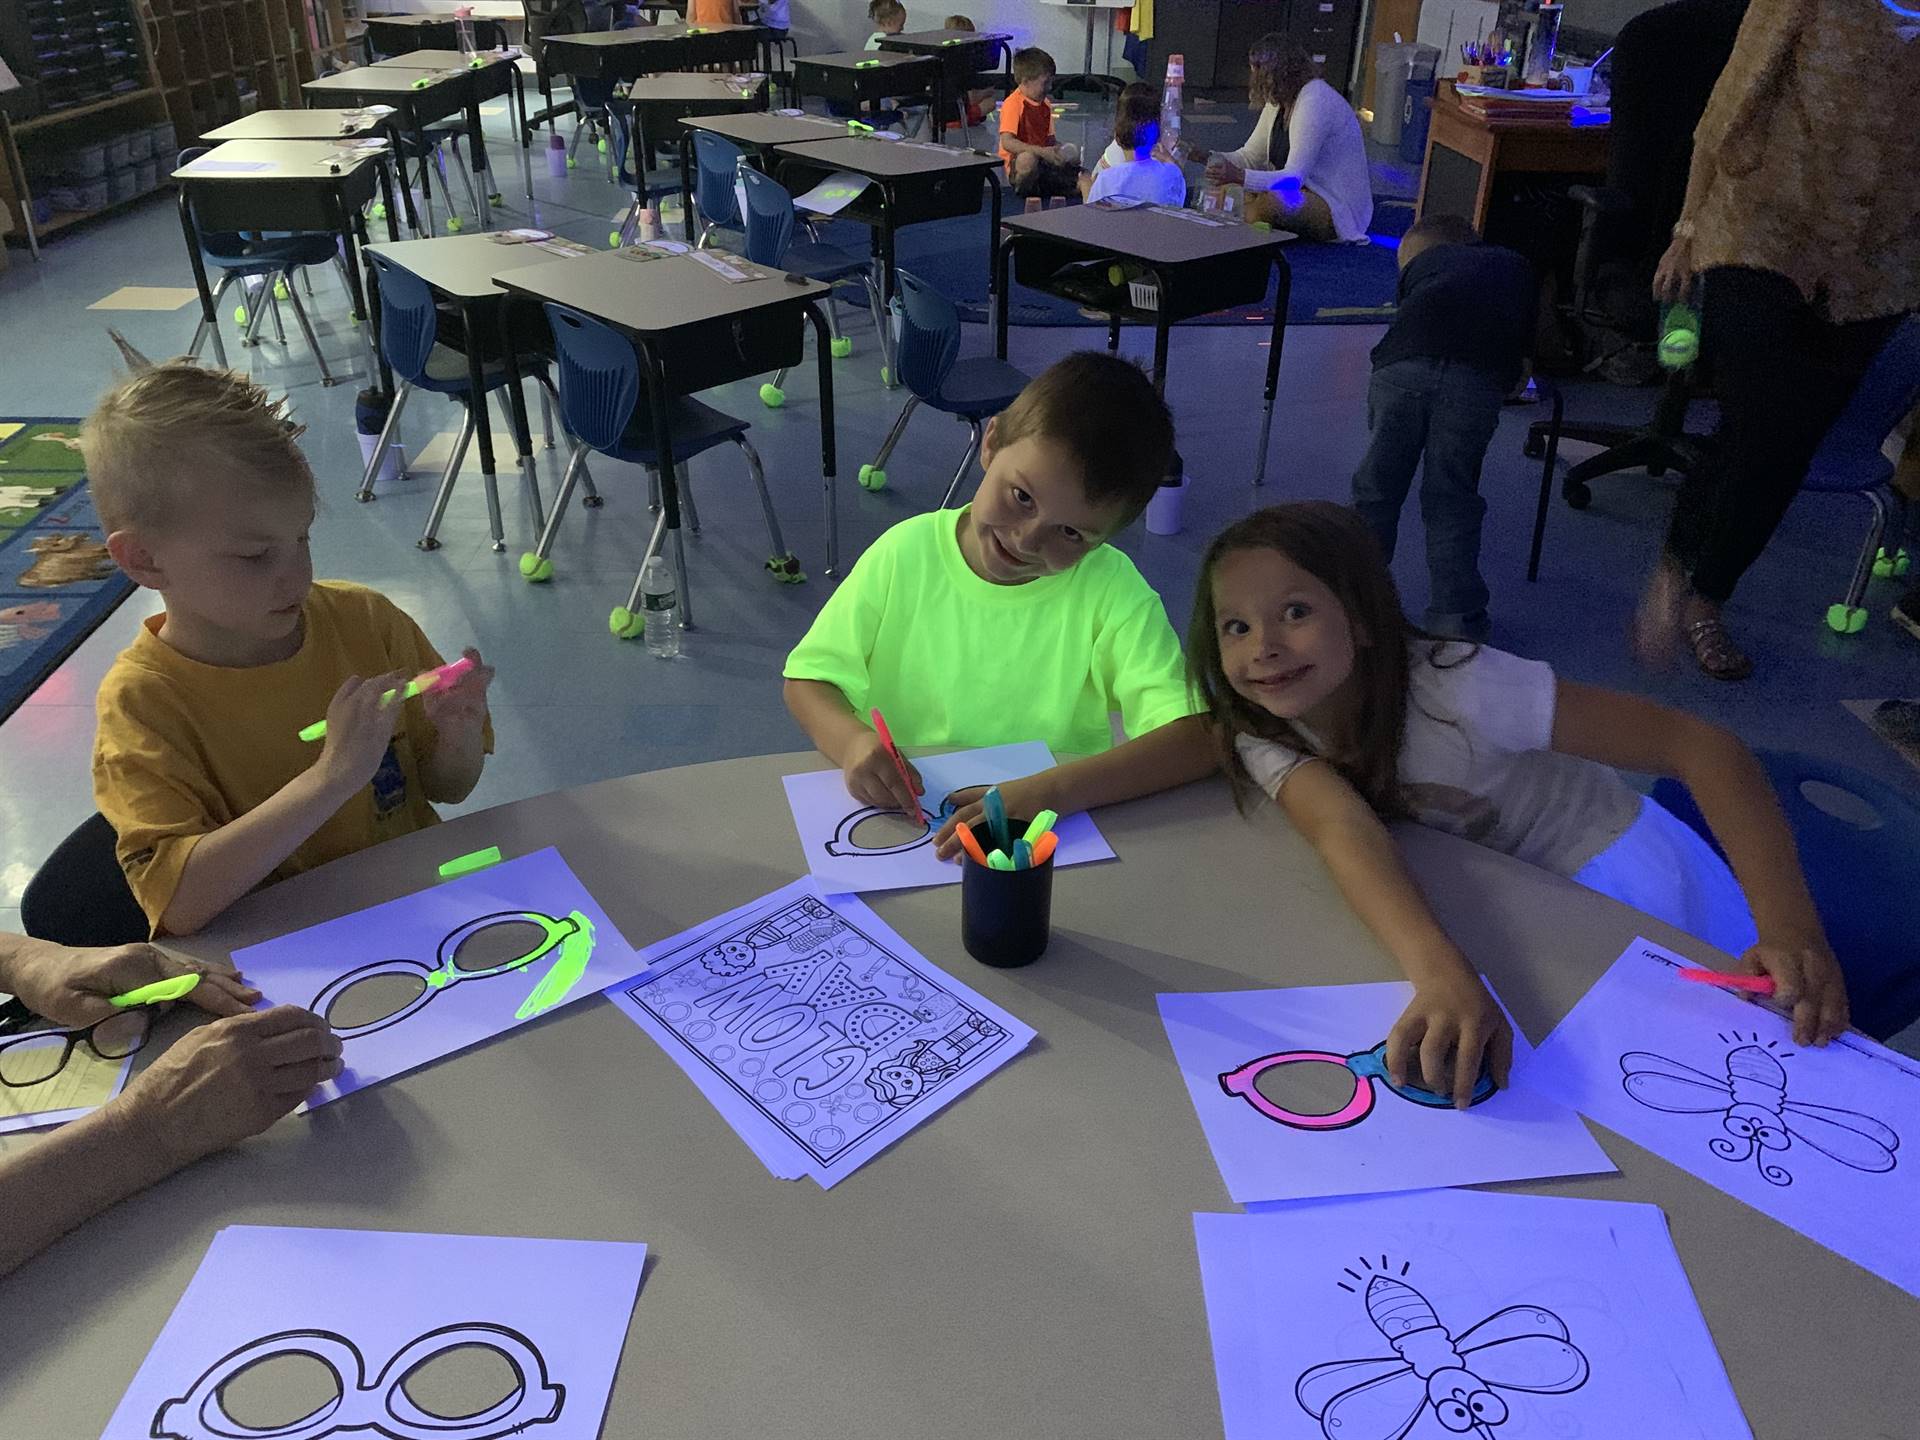 3 students color glow day pictures with markers